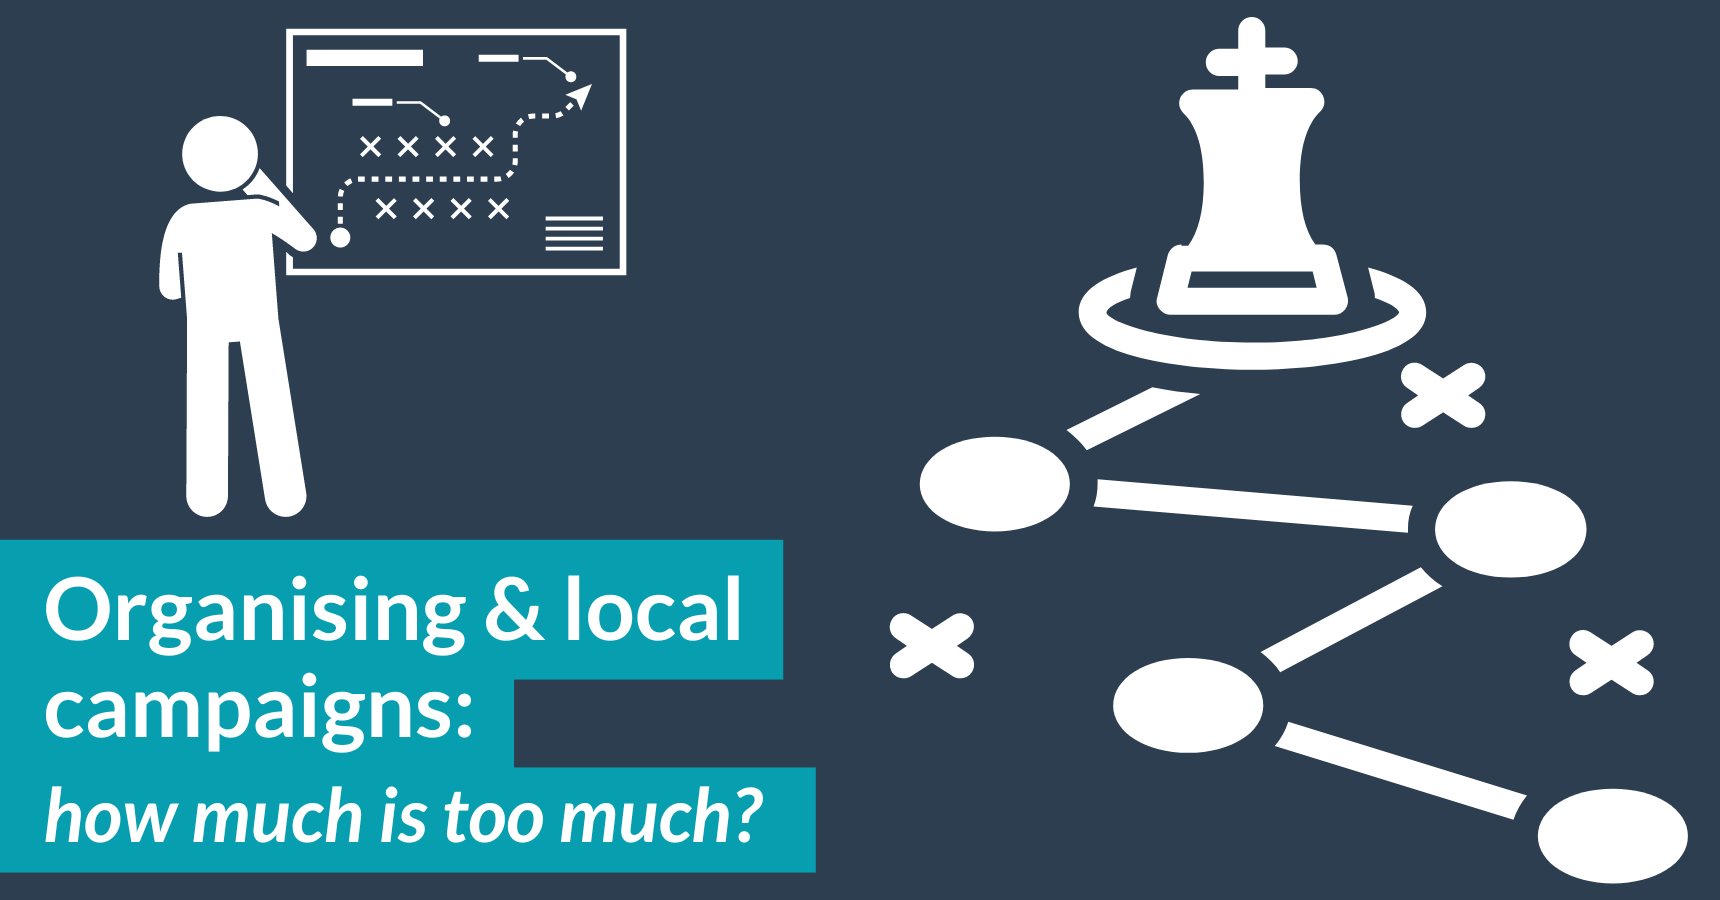 Organising and local campaigns: how much is too much?